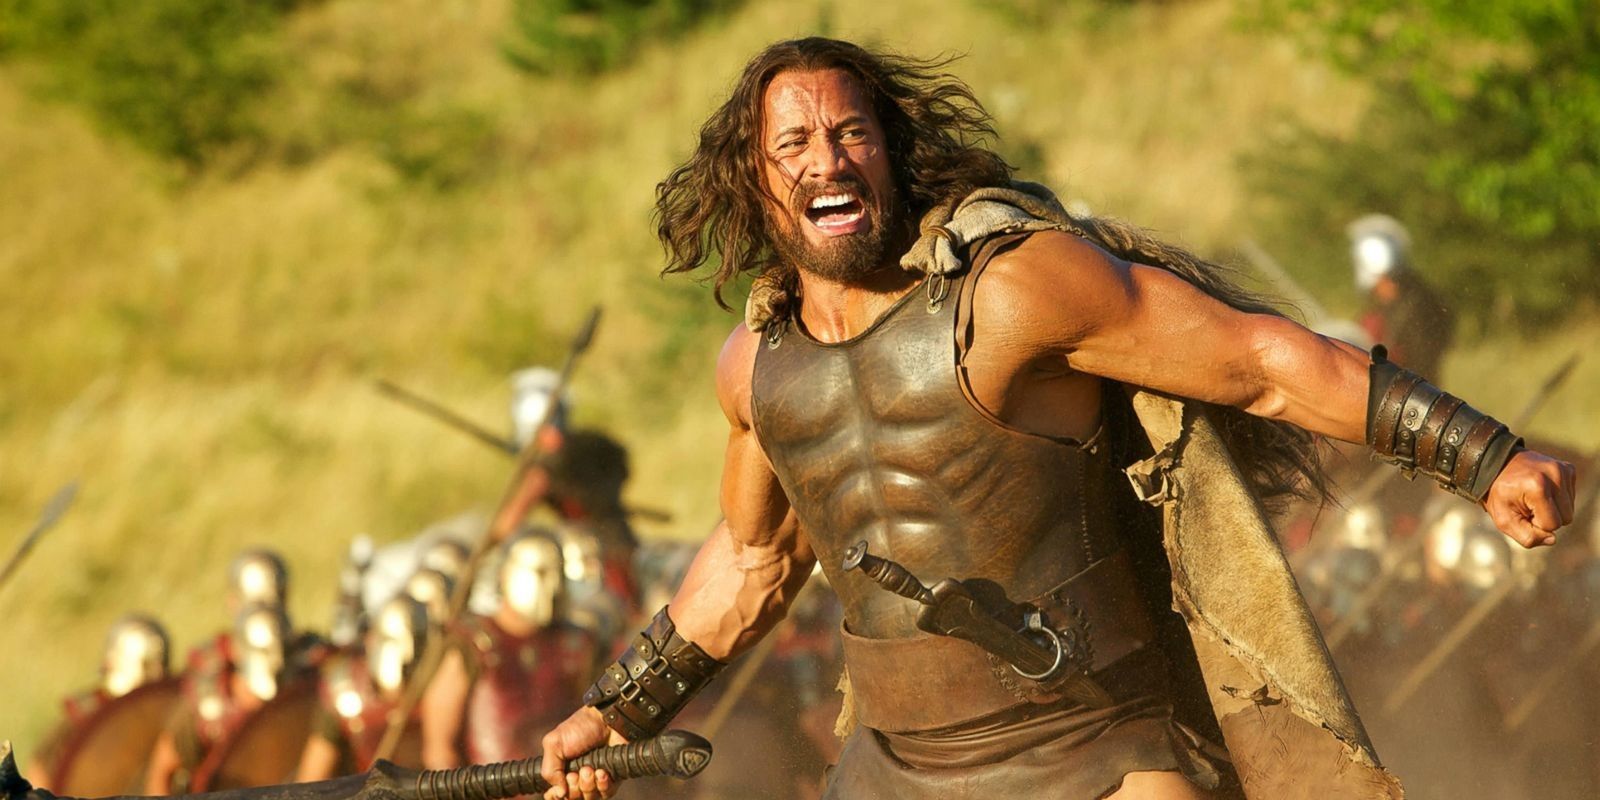 “It’s Admirable”: Dwayne Johnson’s 2014 Fantasy Movie Gets Decent Score From Historian